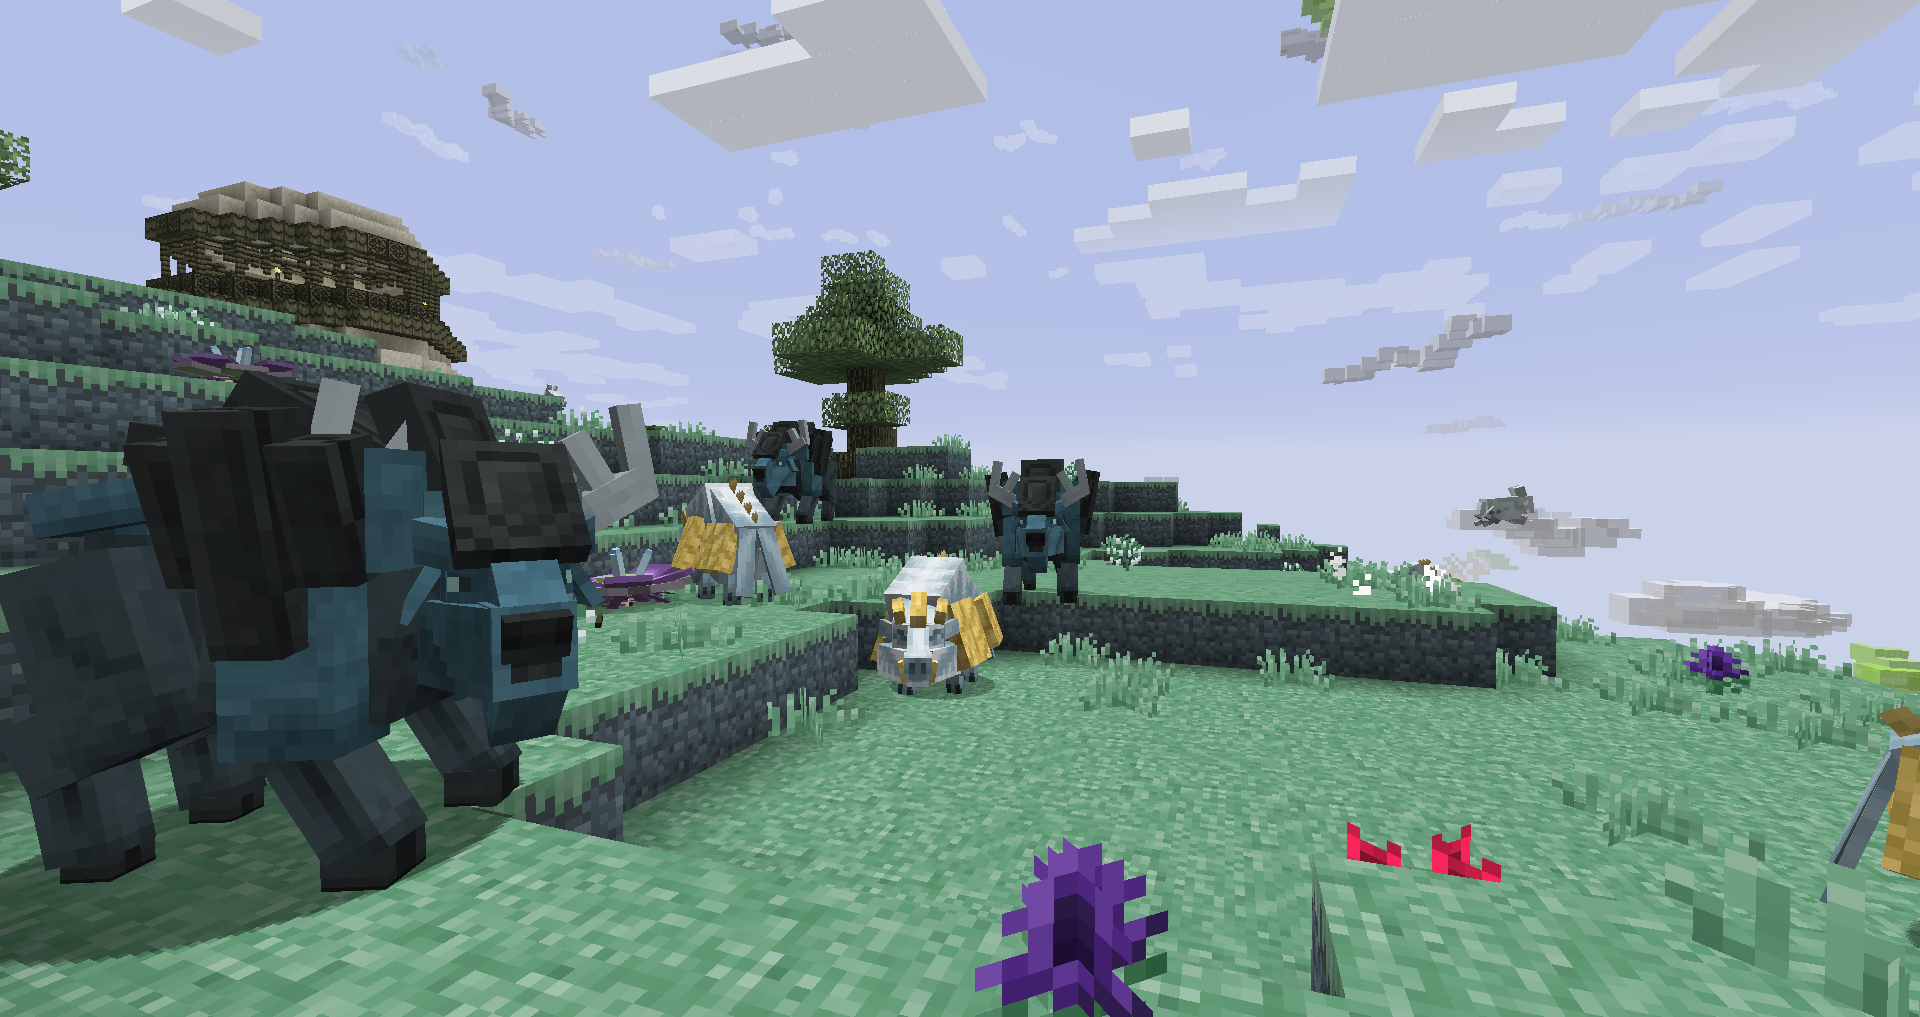 New mobs!